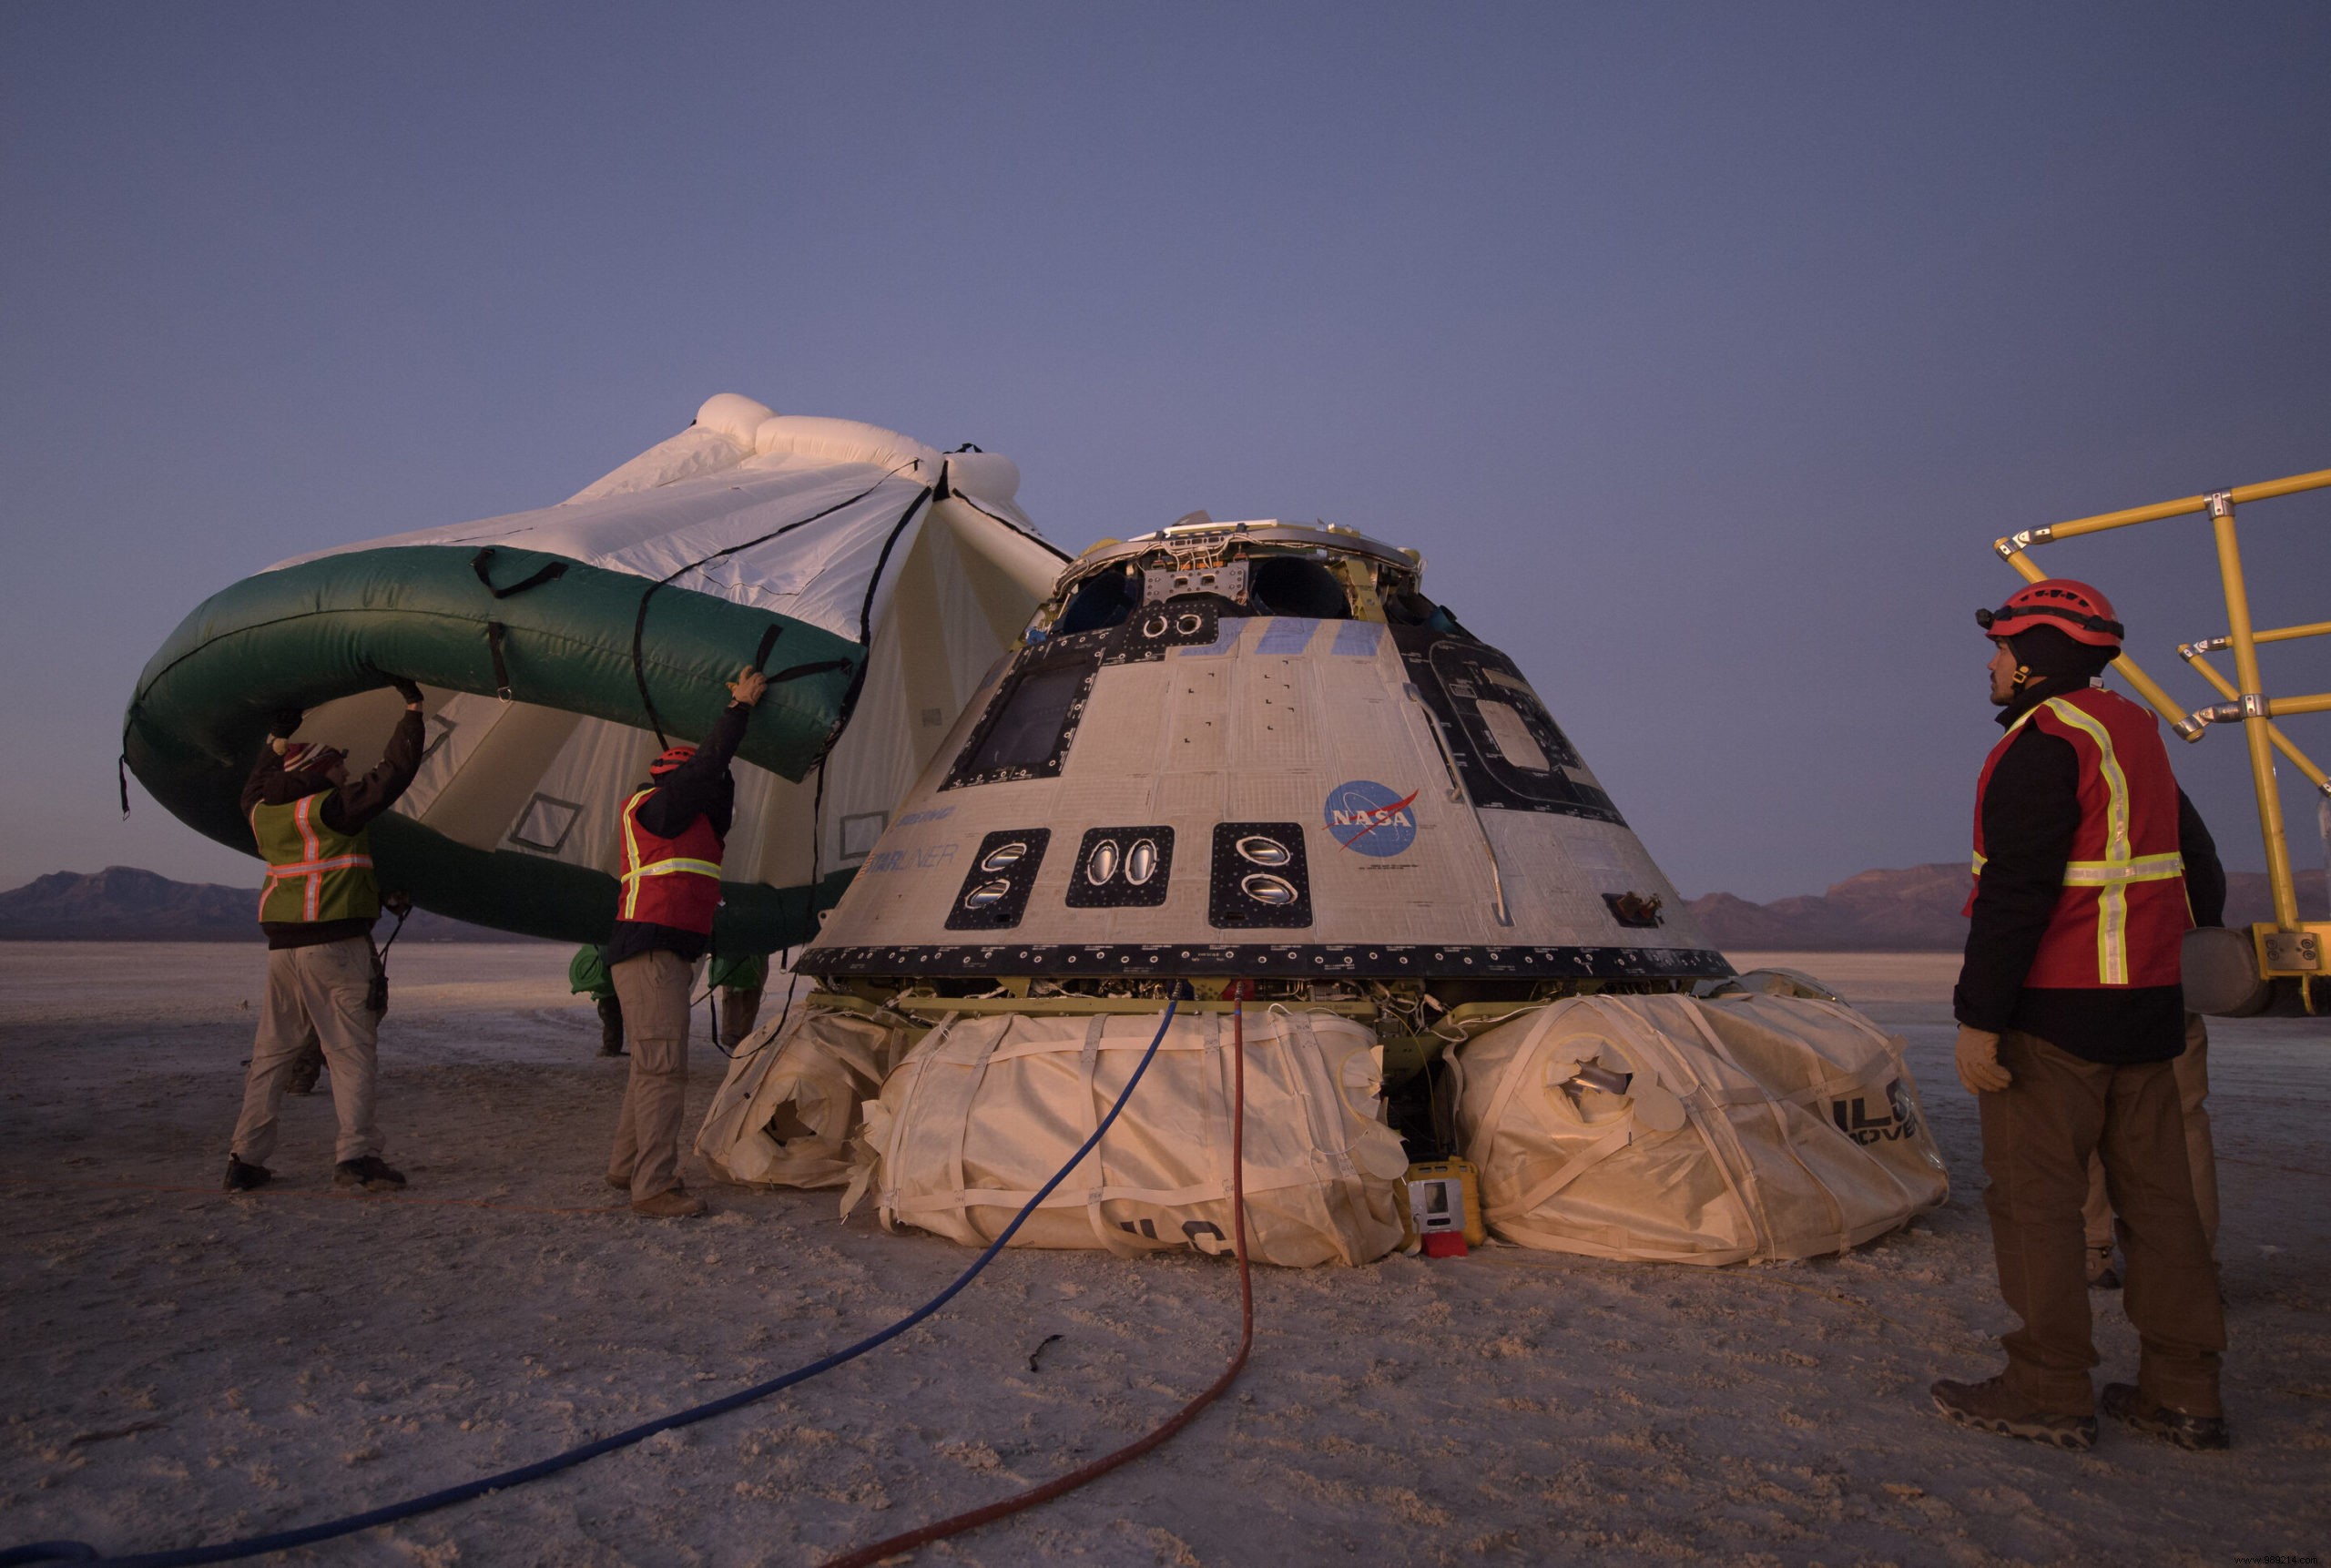 Where is the Starliner capsule that is to take astronauts to the ISS? 